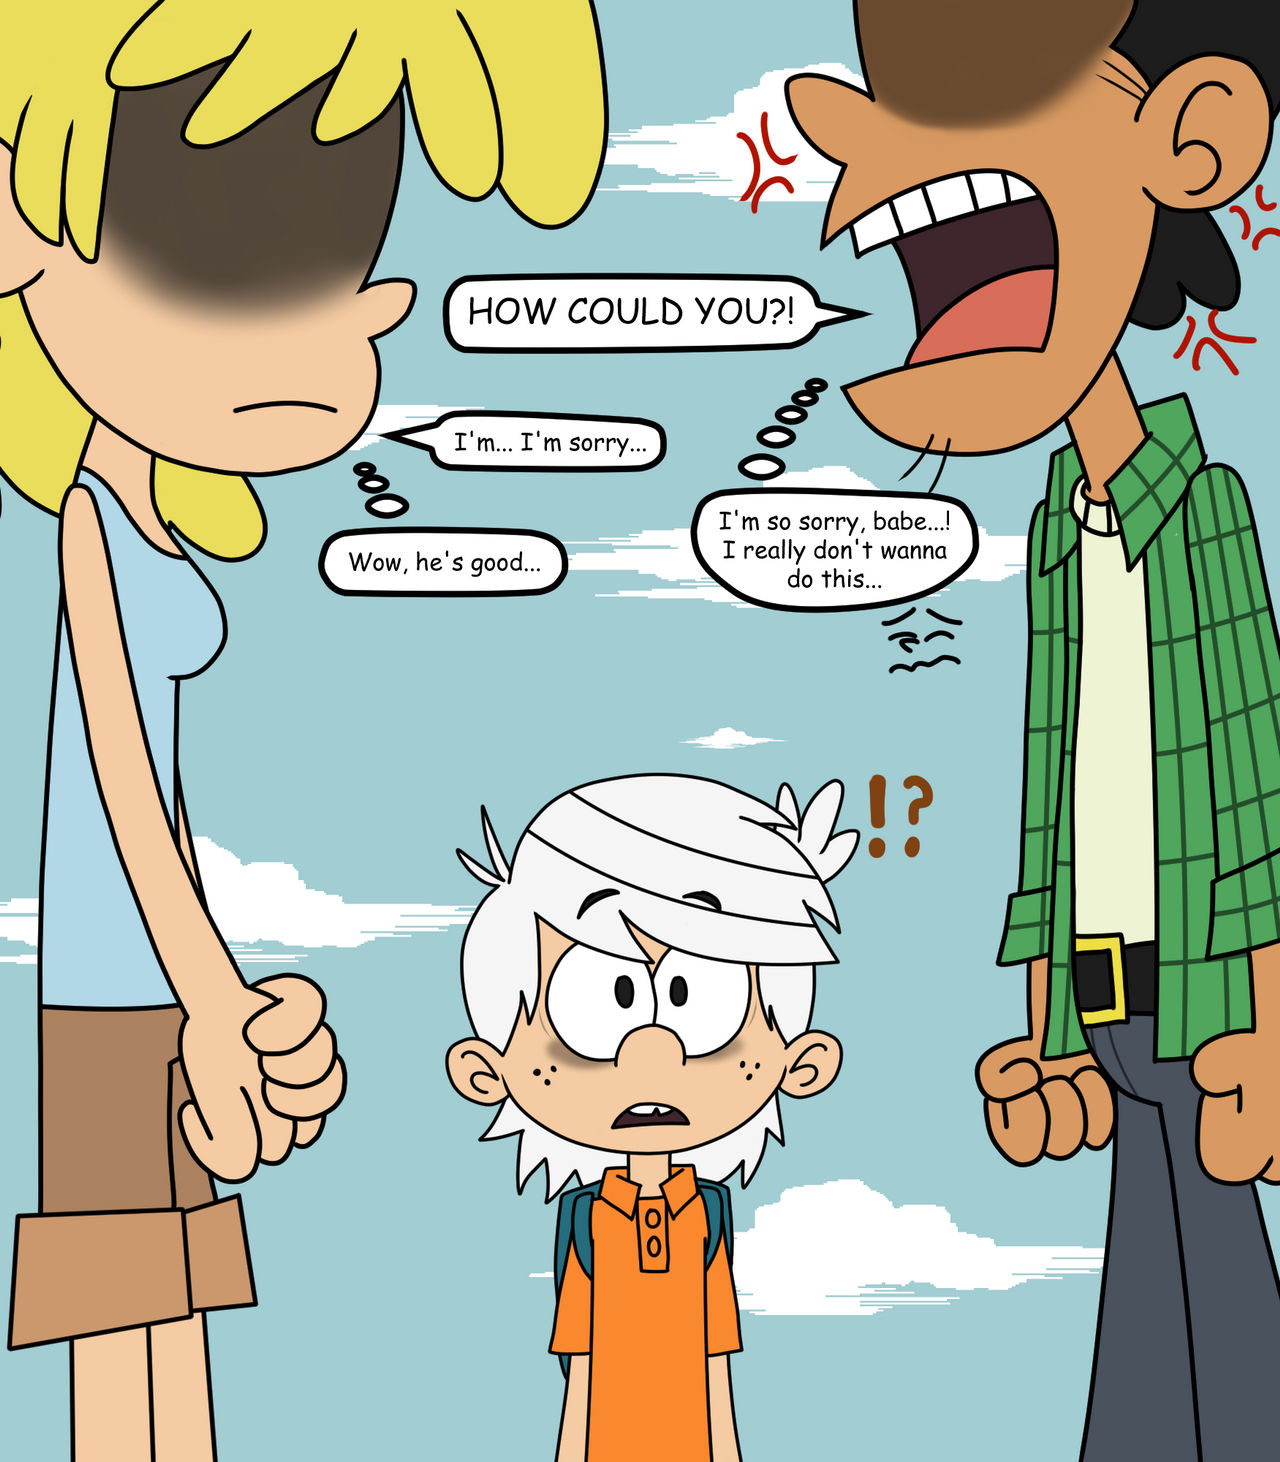 Loud House - The Club Argues with Each Other by dlee1293847 on